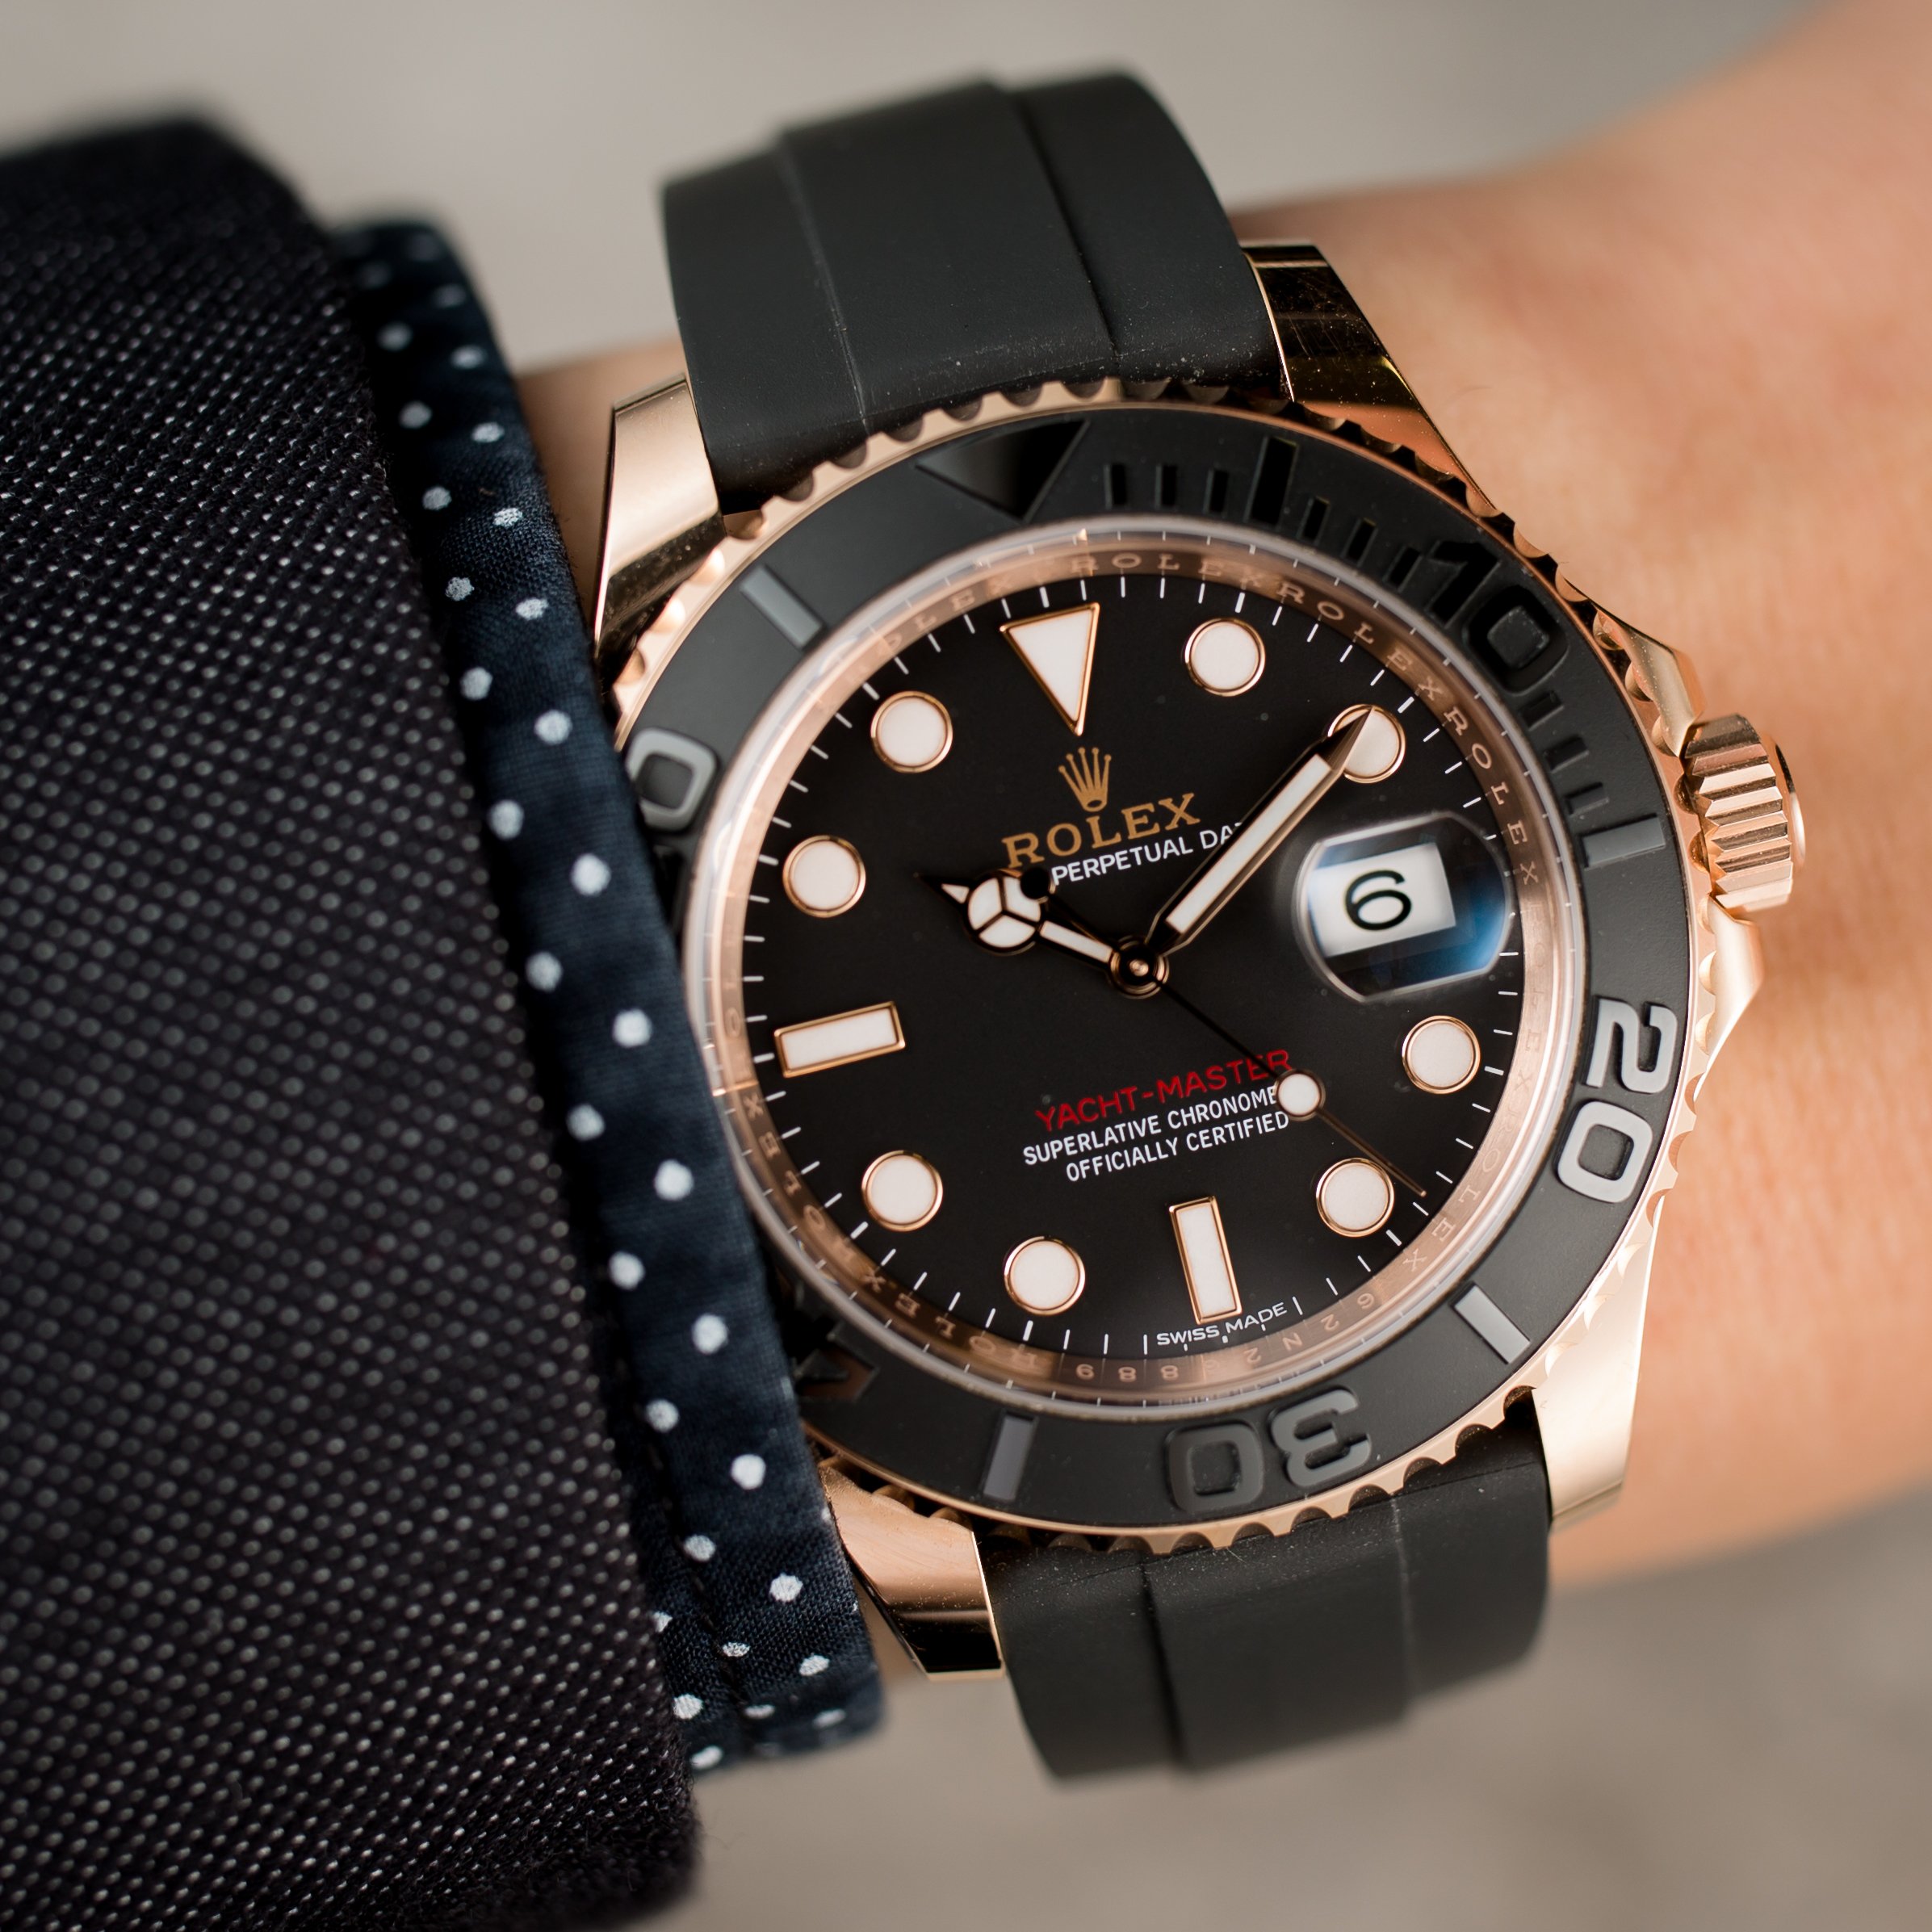 Rolex Yacht-Master 116655 Ultimate Buying Guide | LaptrinhX / News